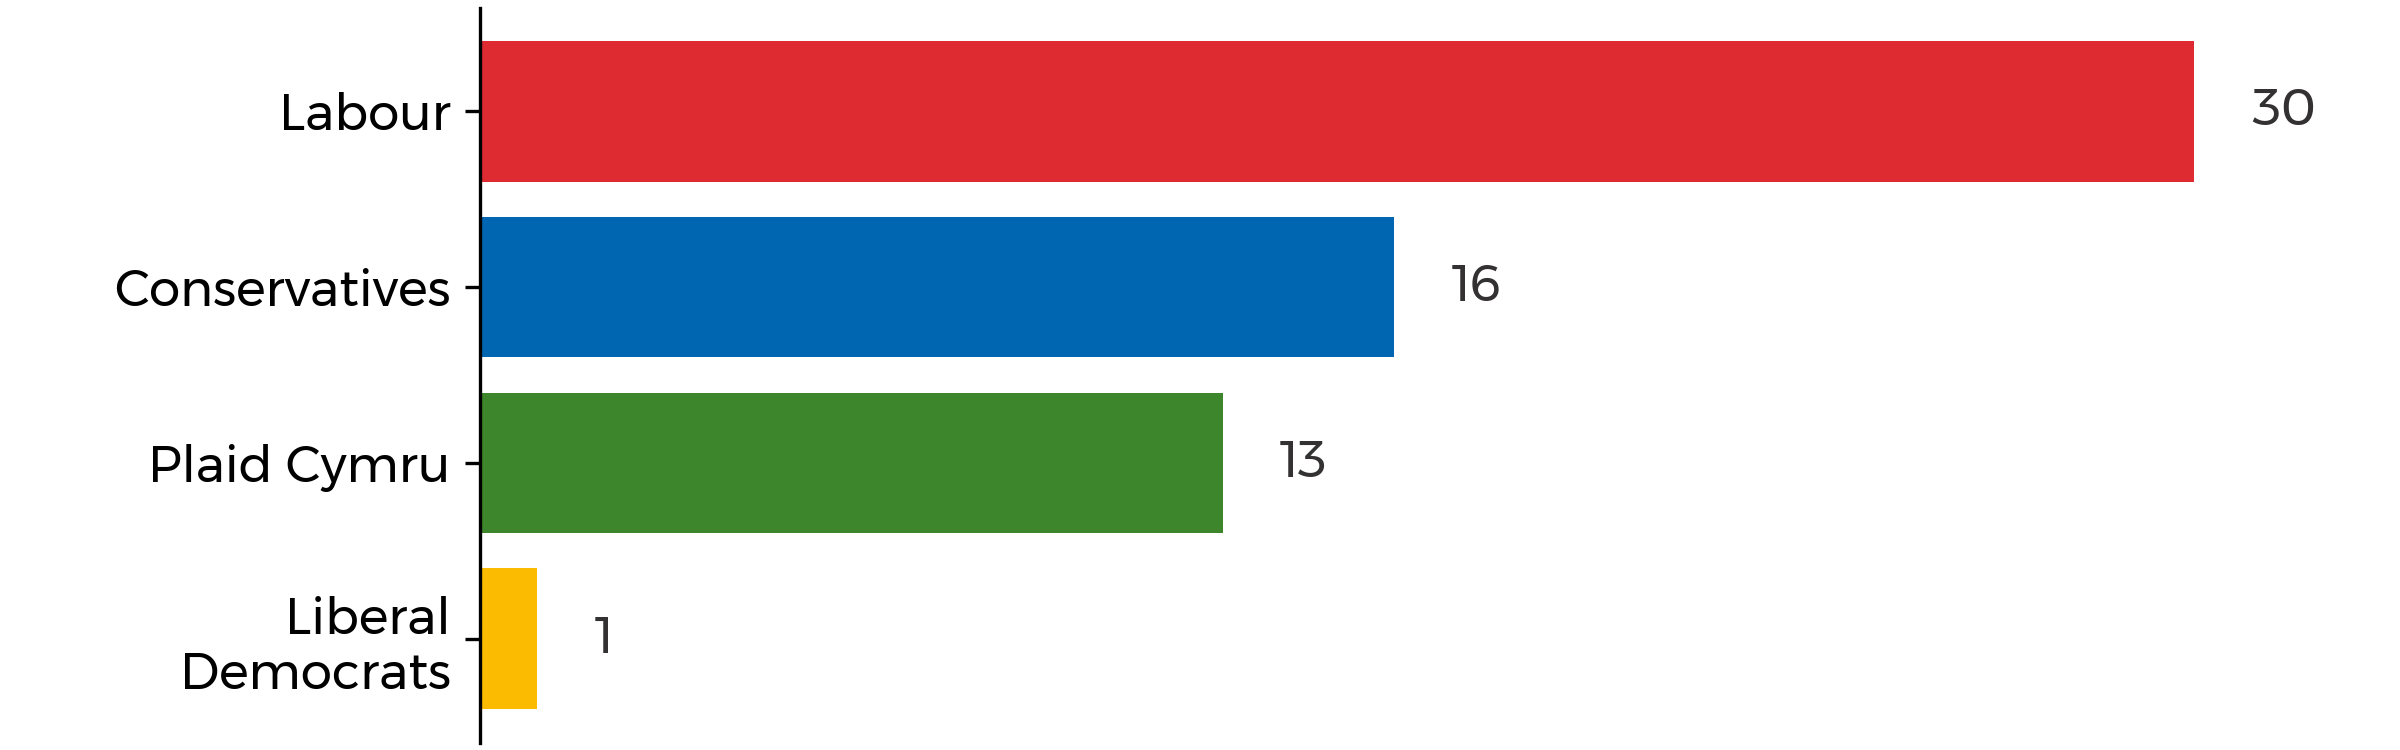 A graphic showing the total number of seats. Labour 30, Conservatives 16, Plaid Cymru 13, Liberal Democrats 1